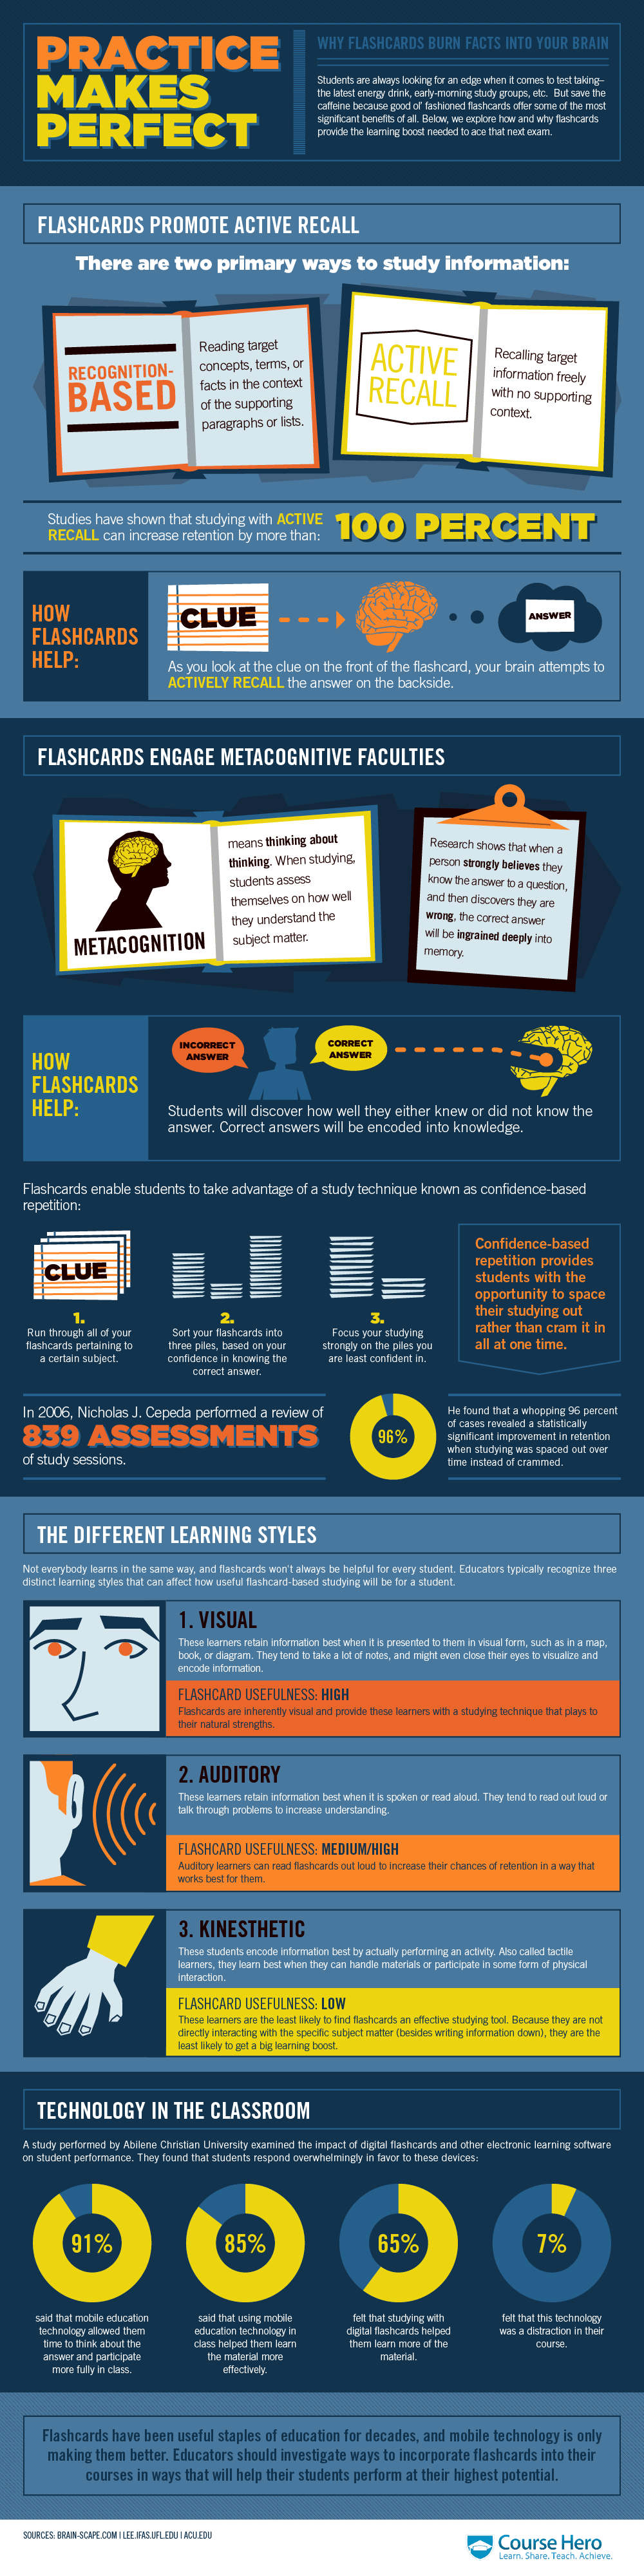 The Significance of Flashcards for Learning Infographic